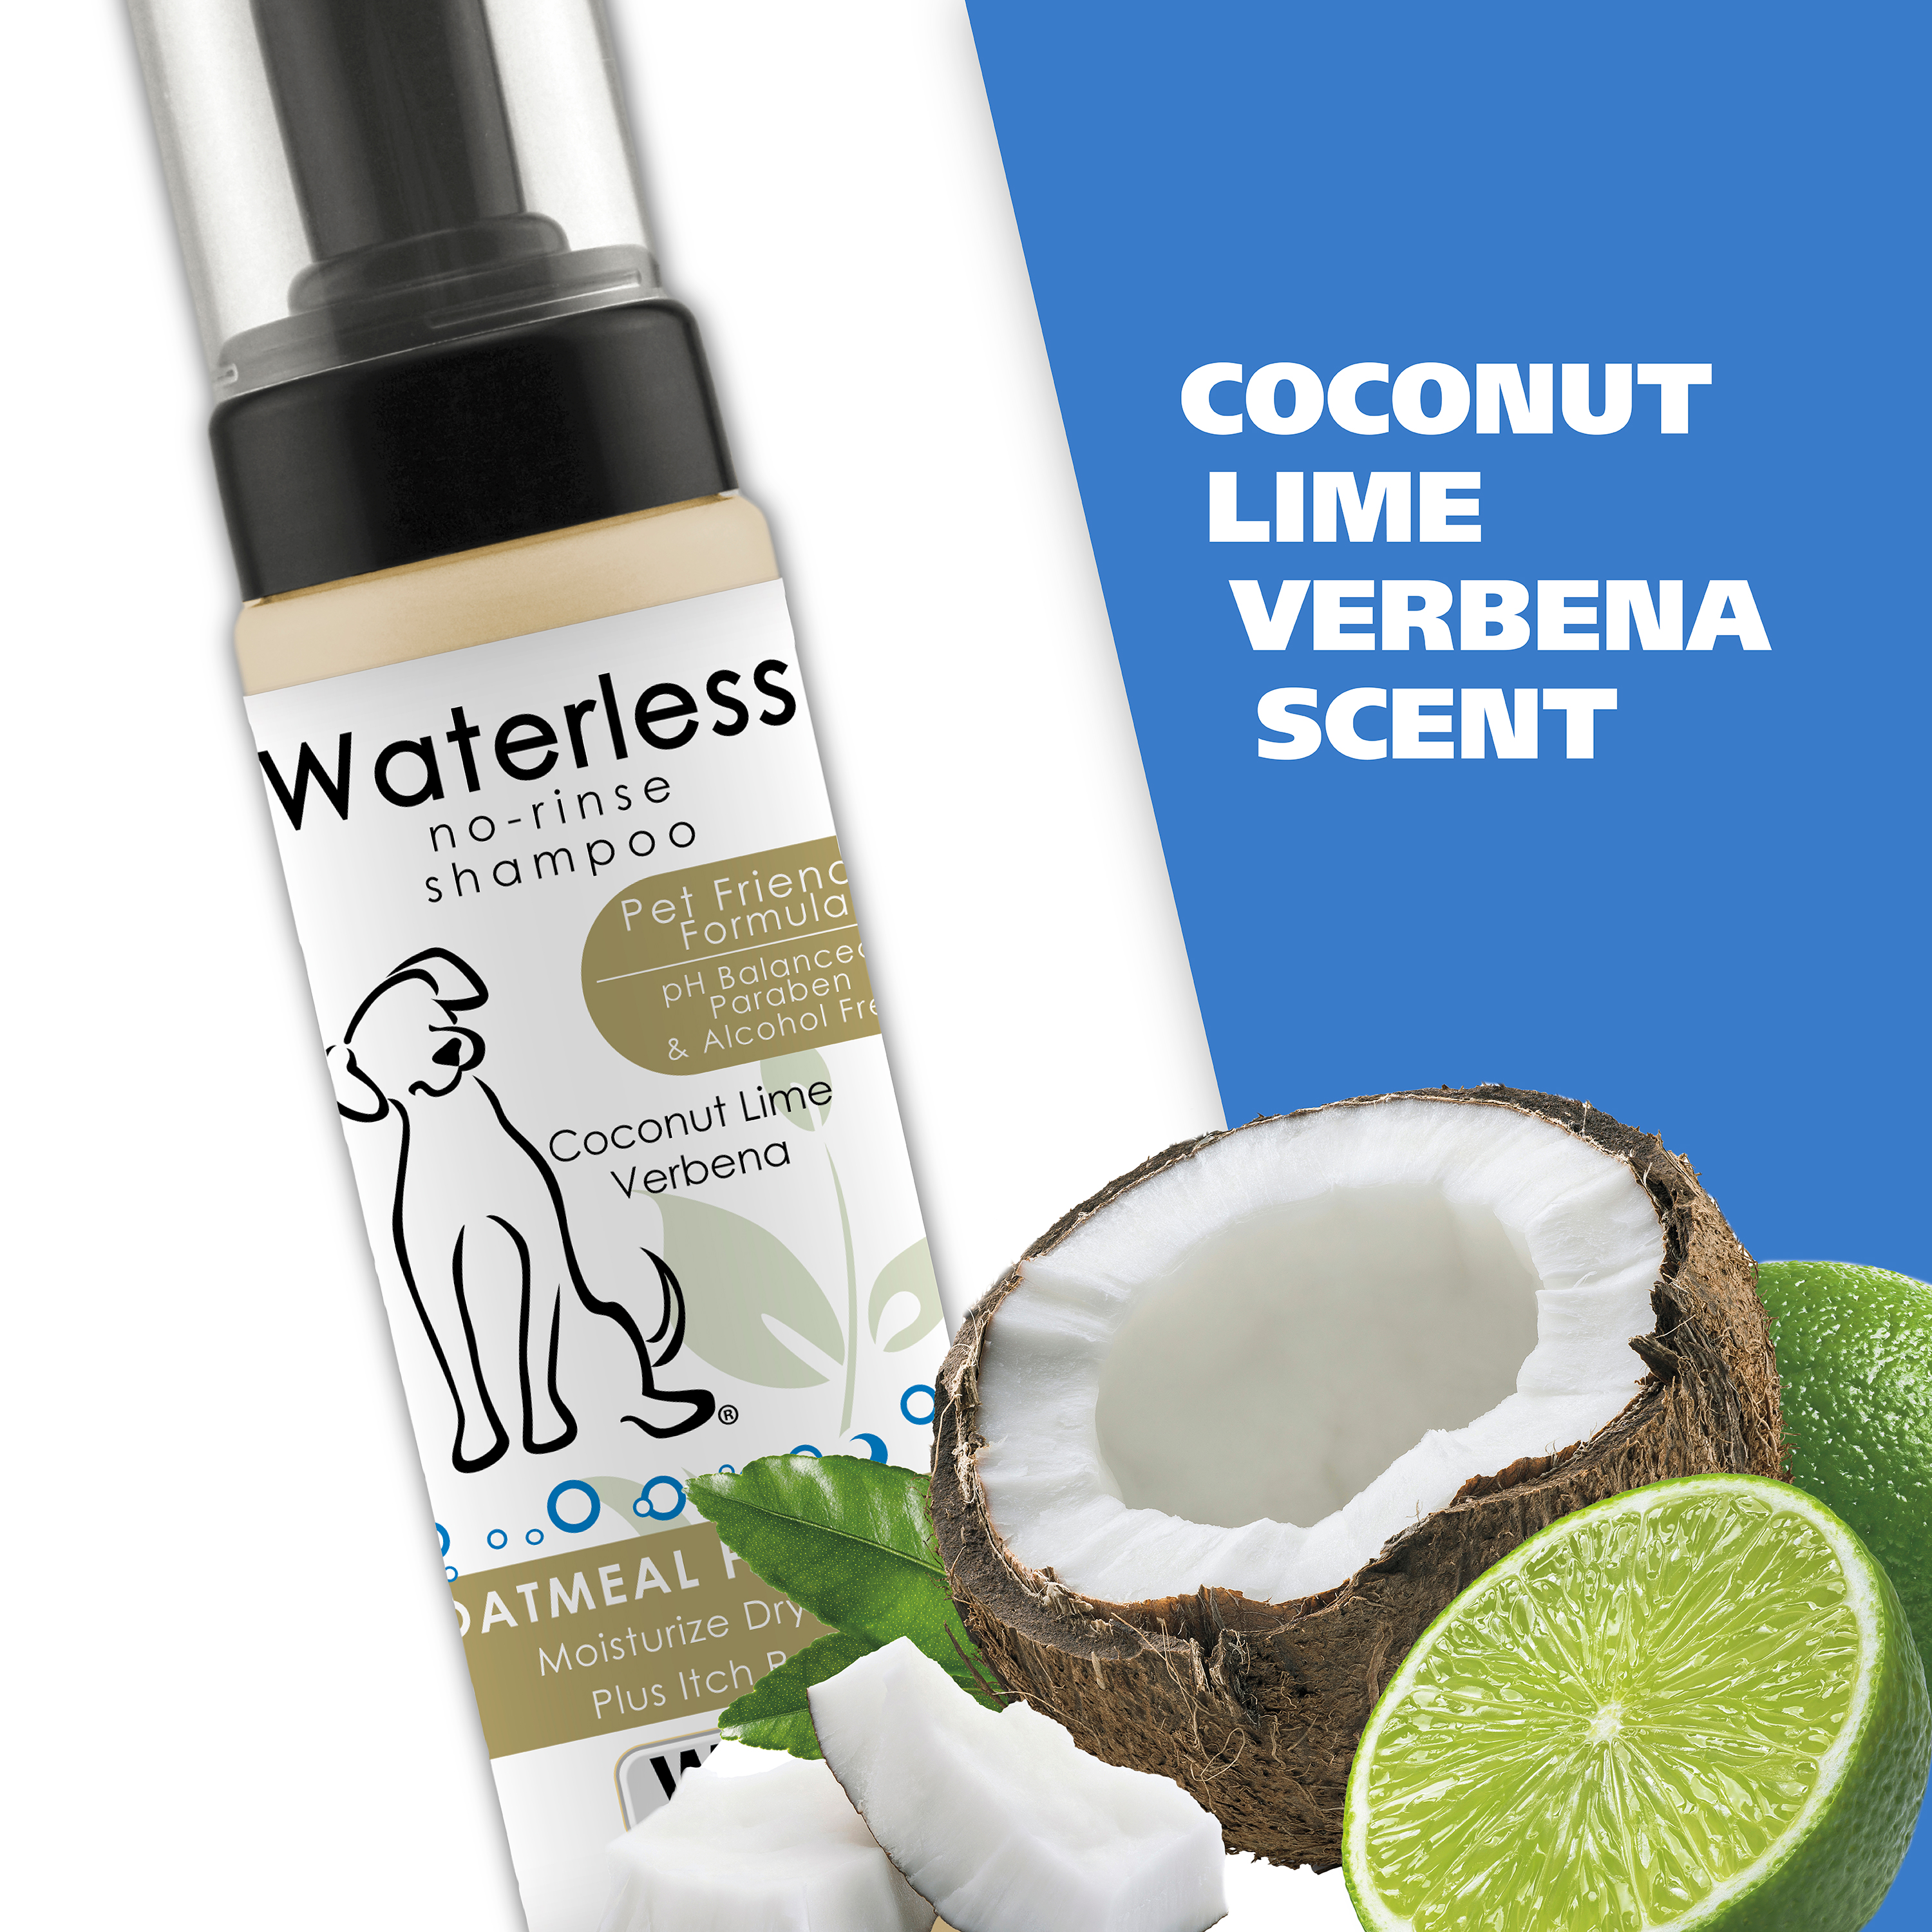 Wahl Waterless No Rinse Coconut Lime Verbena Dog shampoo, 7.1-oz bottle 820015A - image 4 of 9